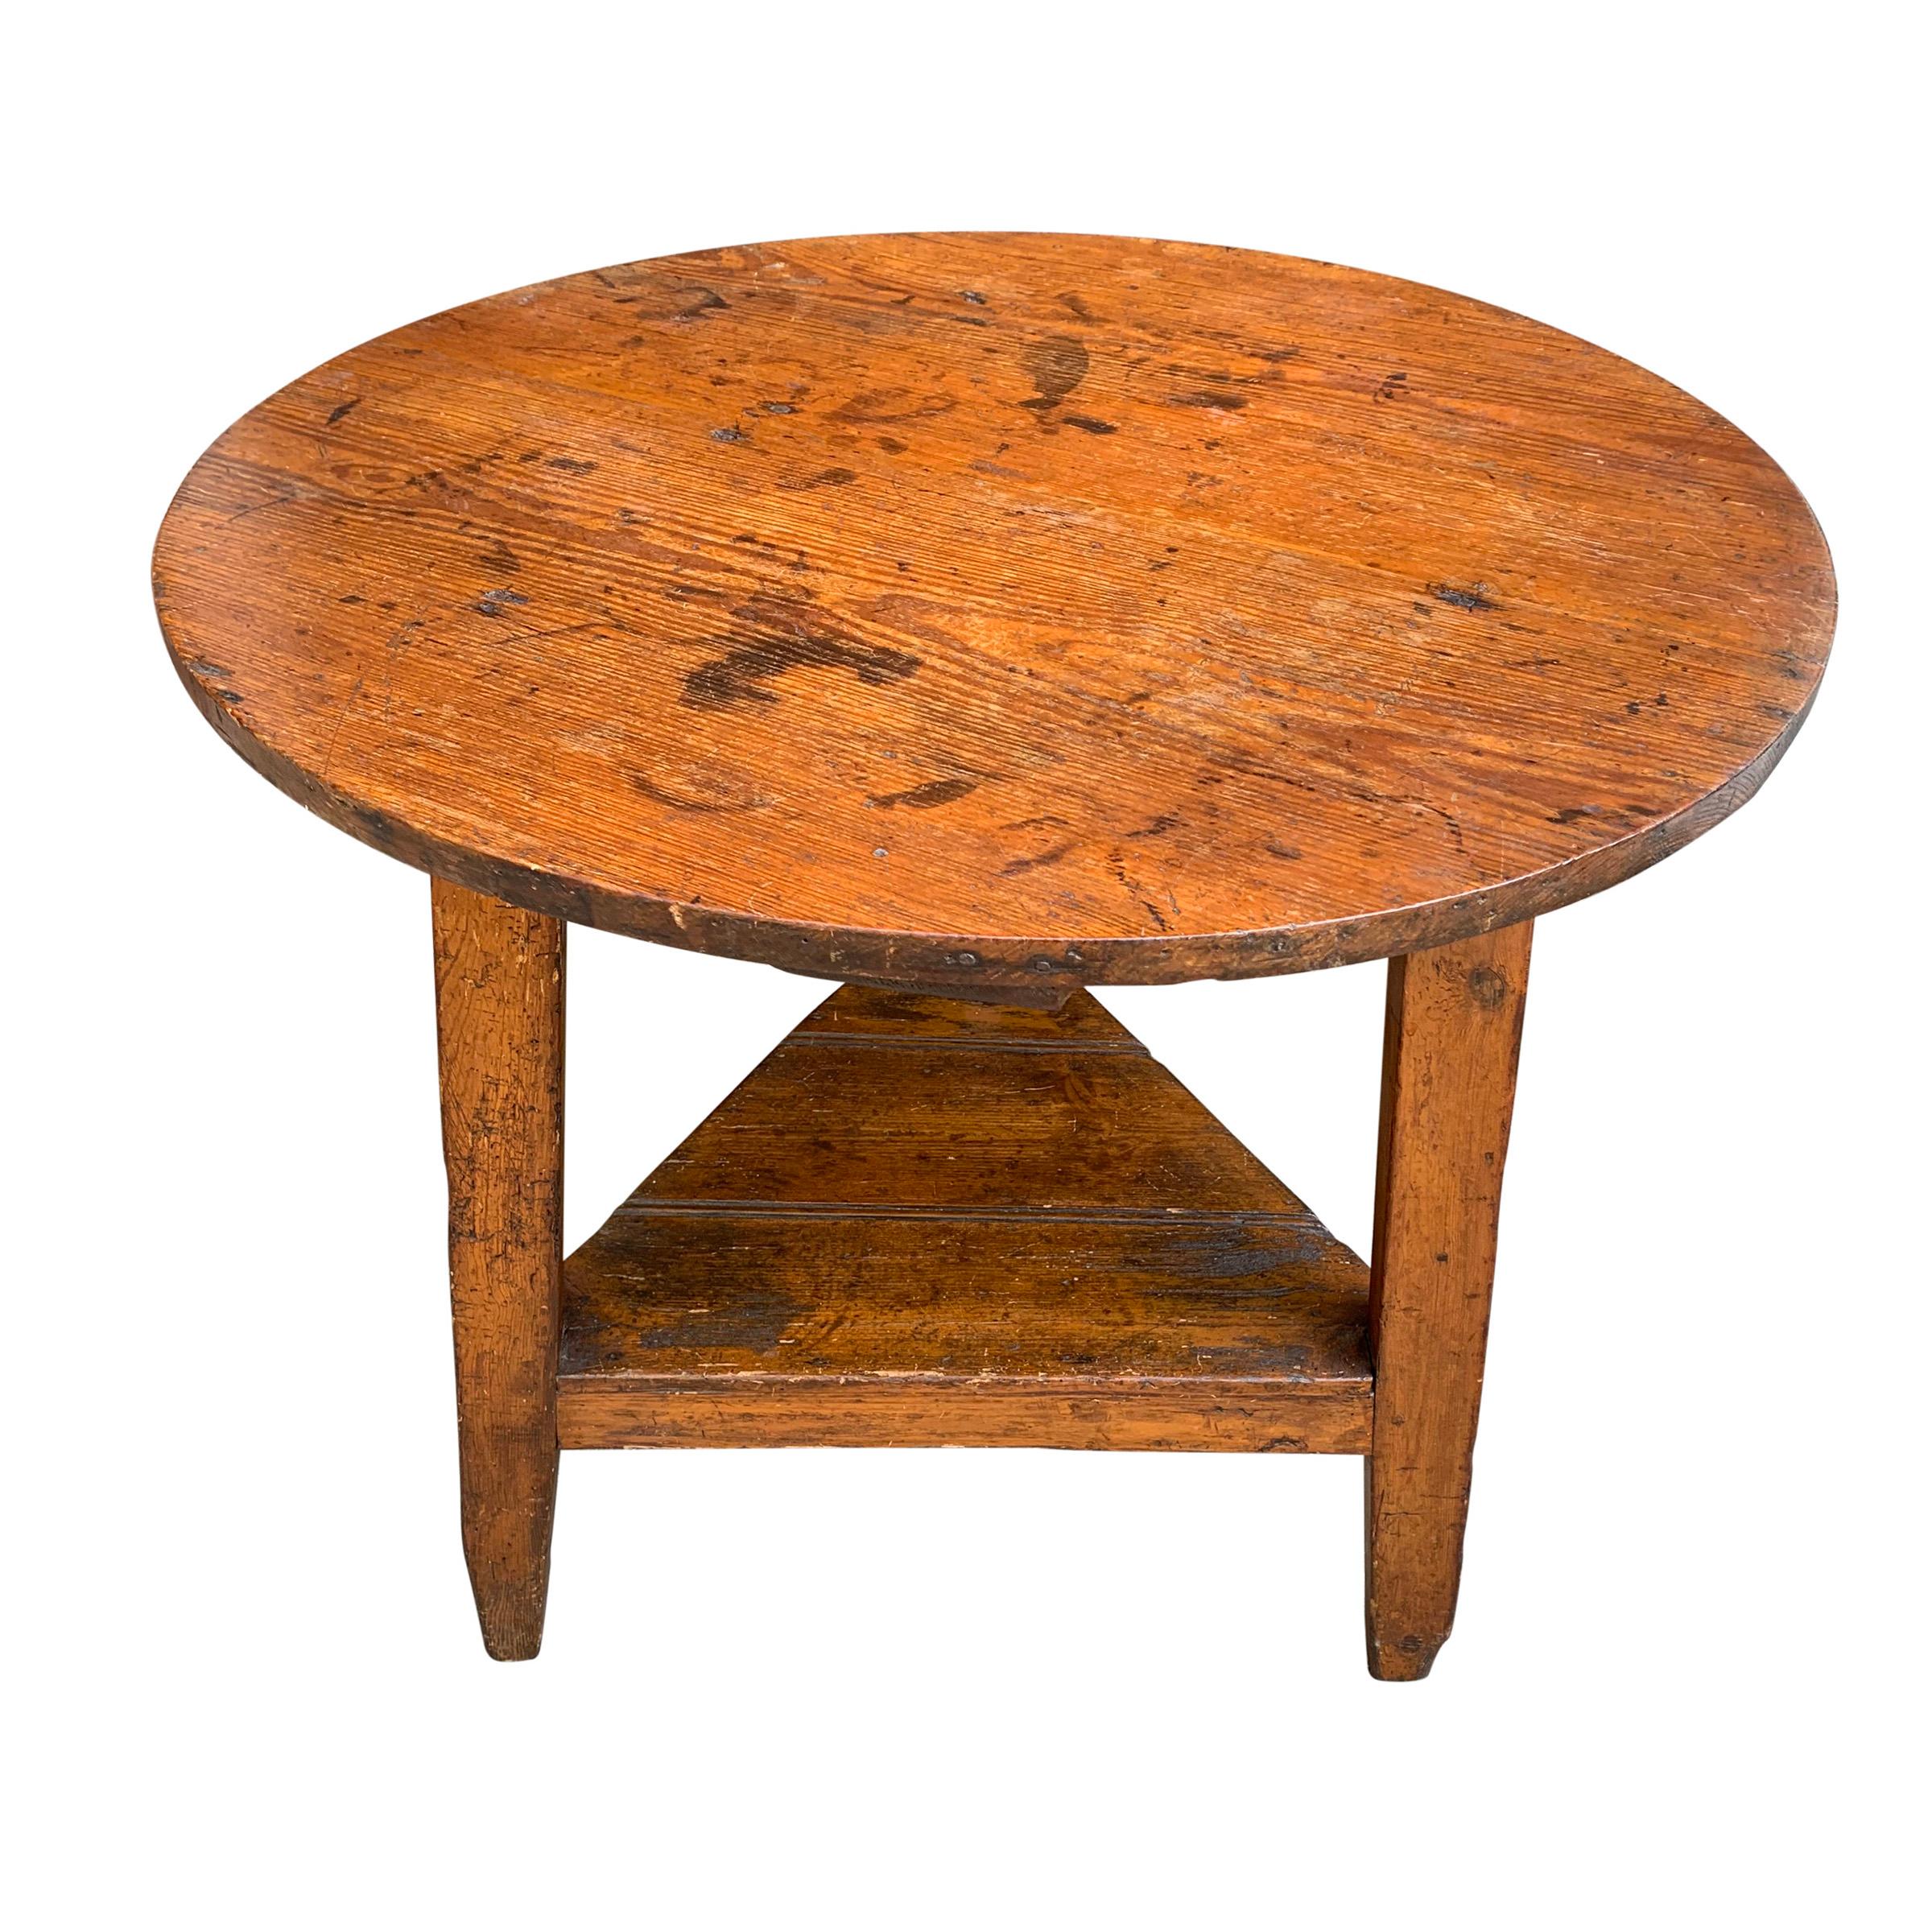 Country 19th Century English Cricket Table with Shelf